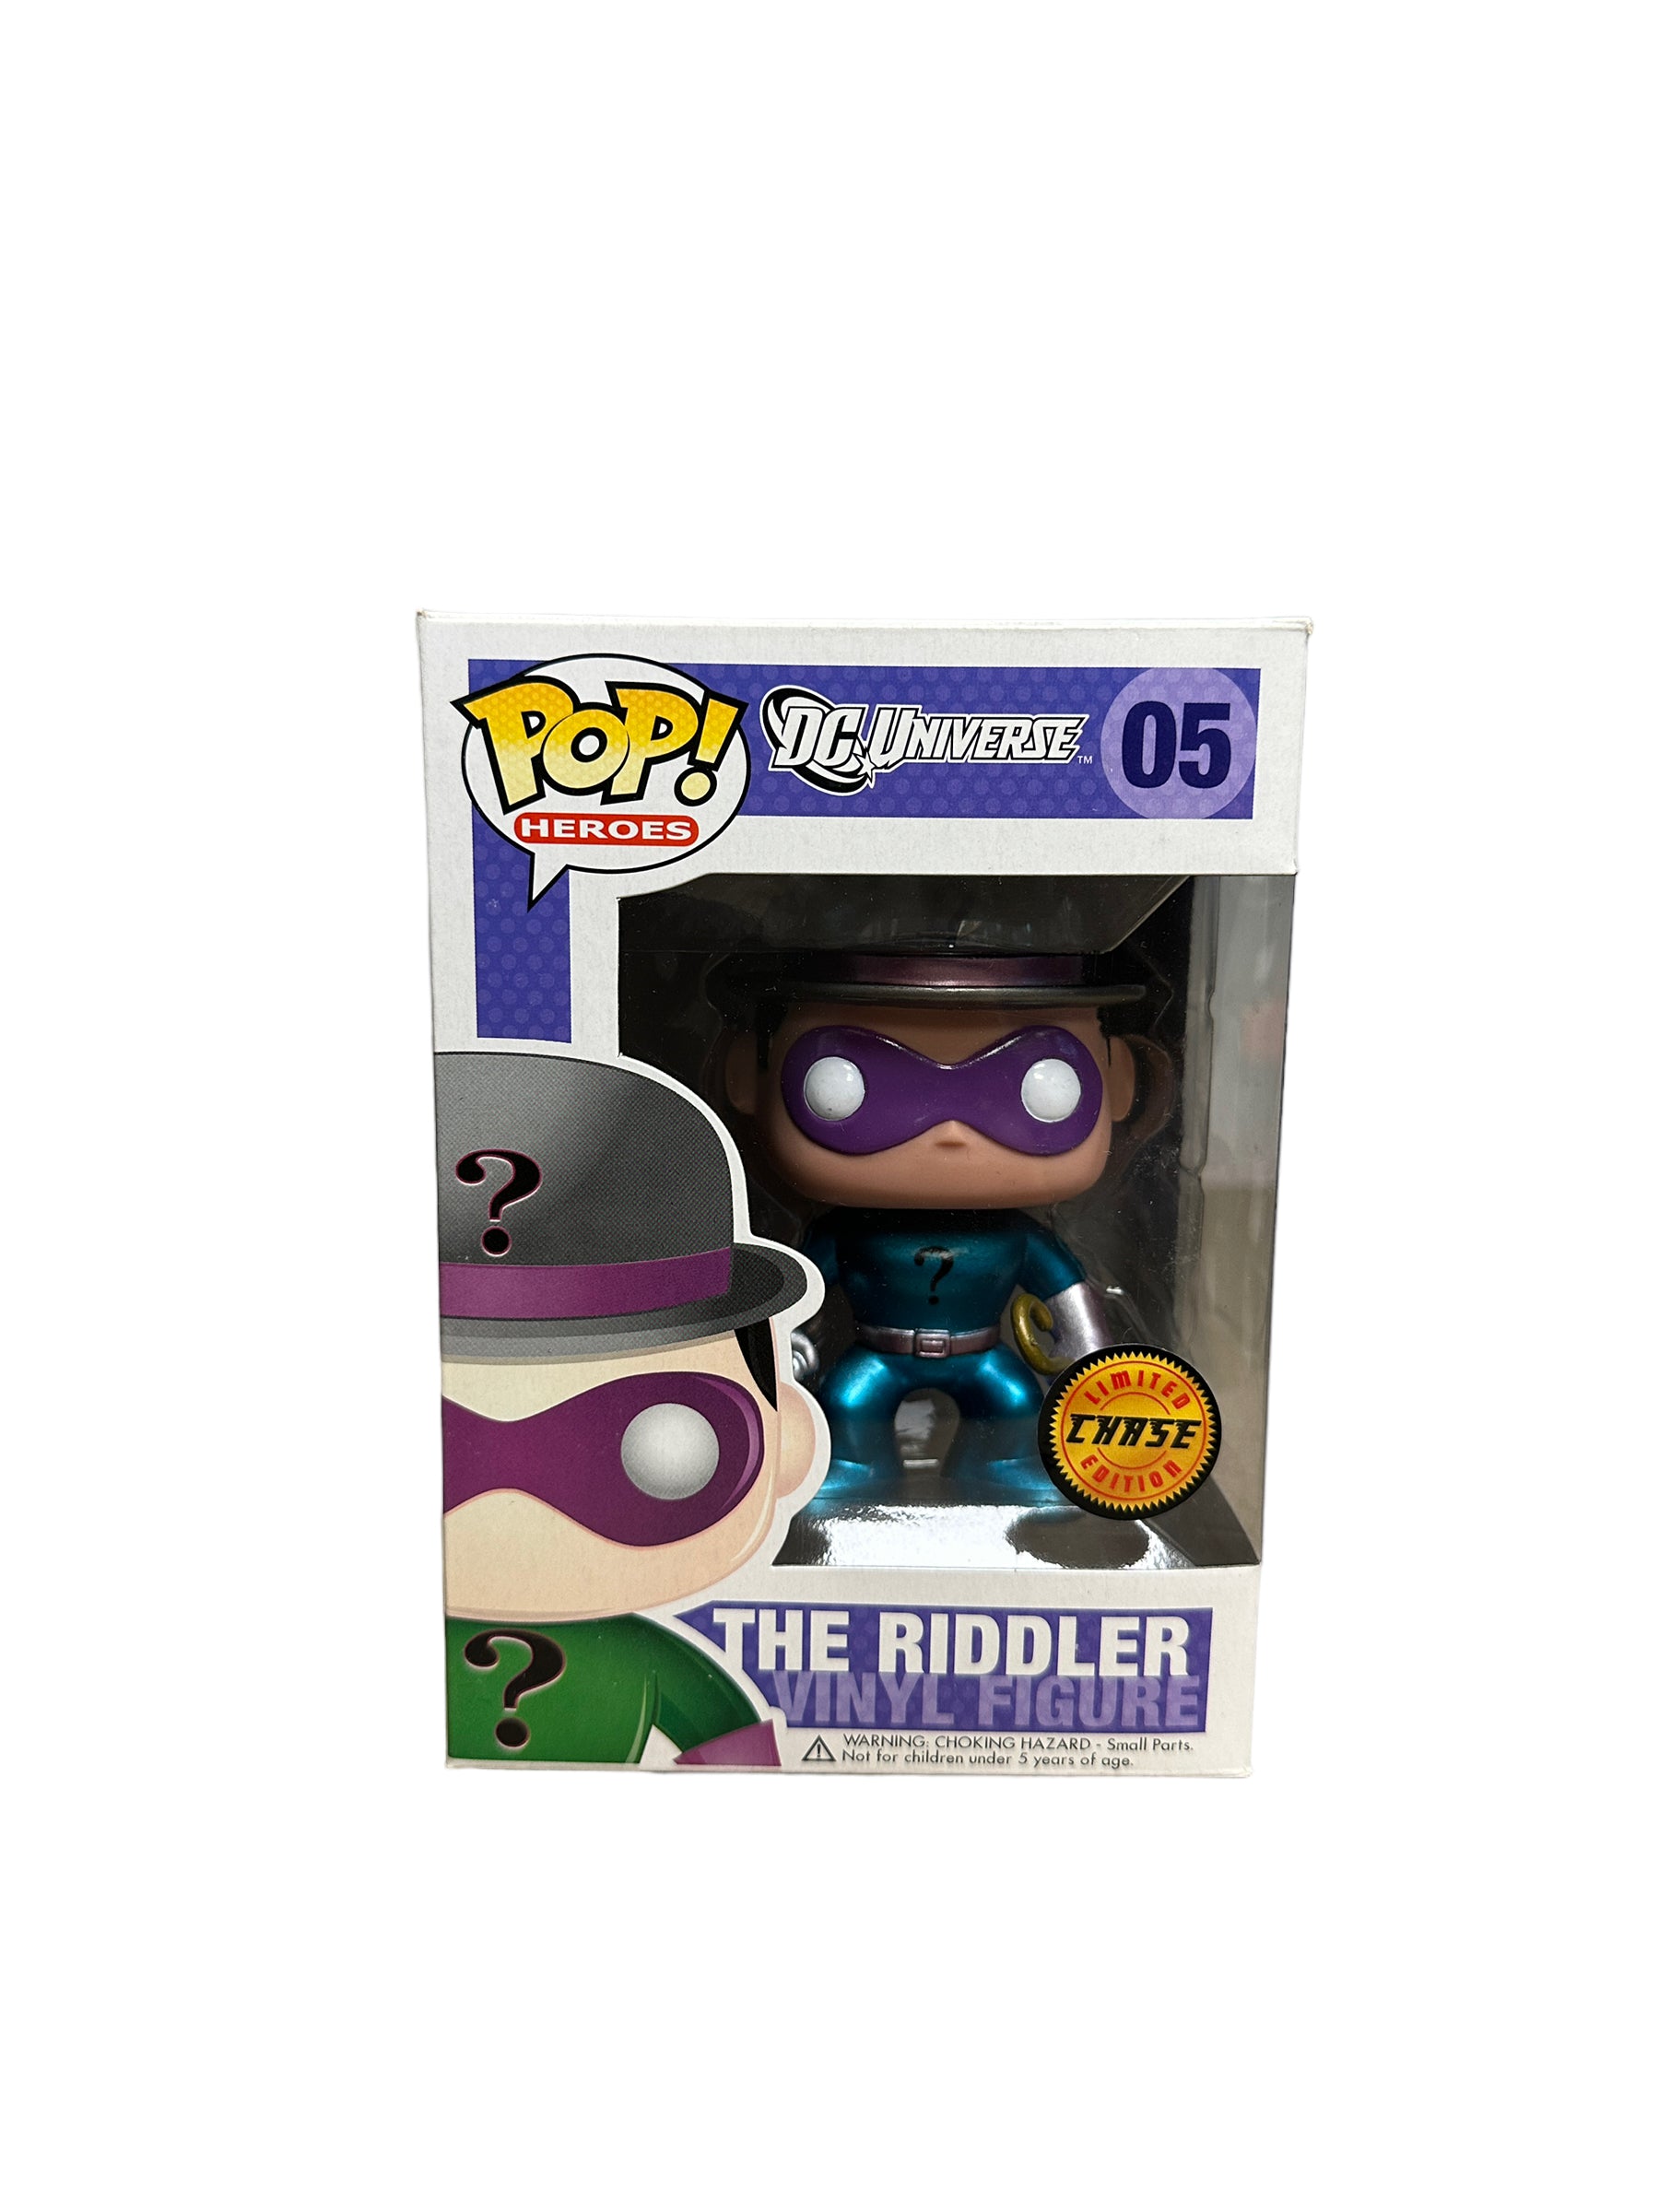 The Riddler #05 (Metallic Chase) Funko Pop! - DC Universe - Condition 8.25/10